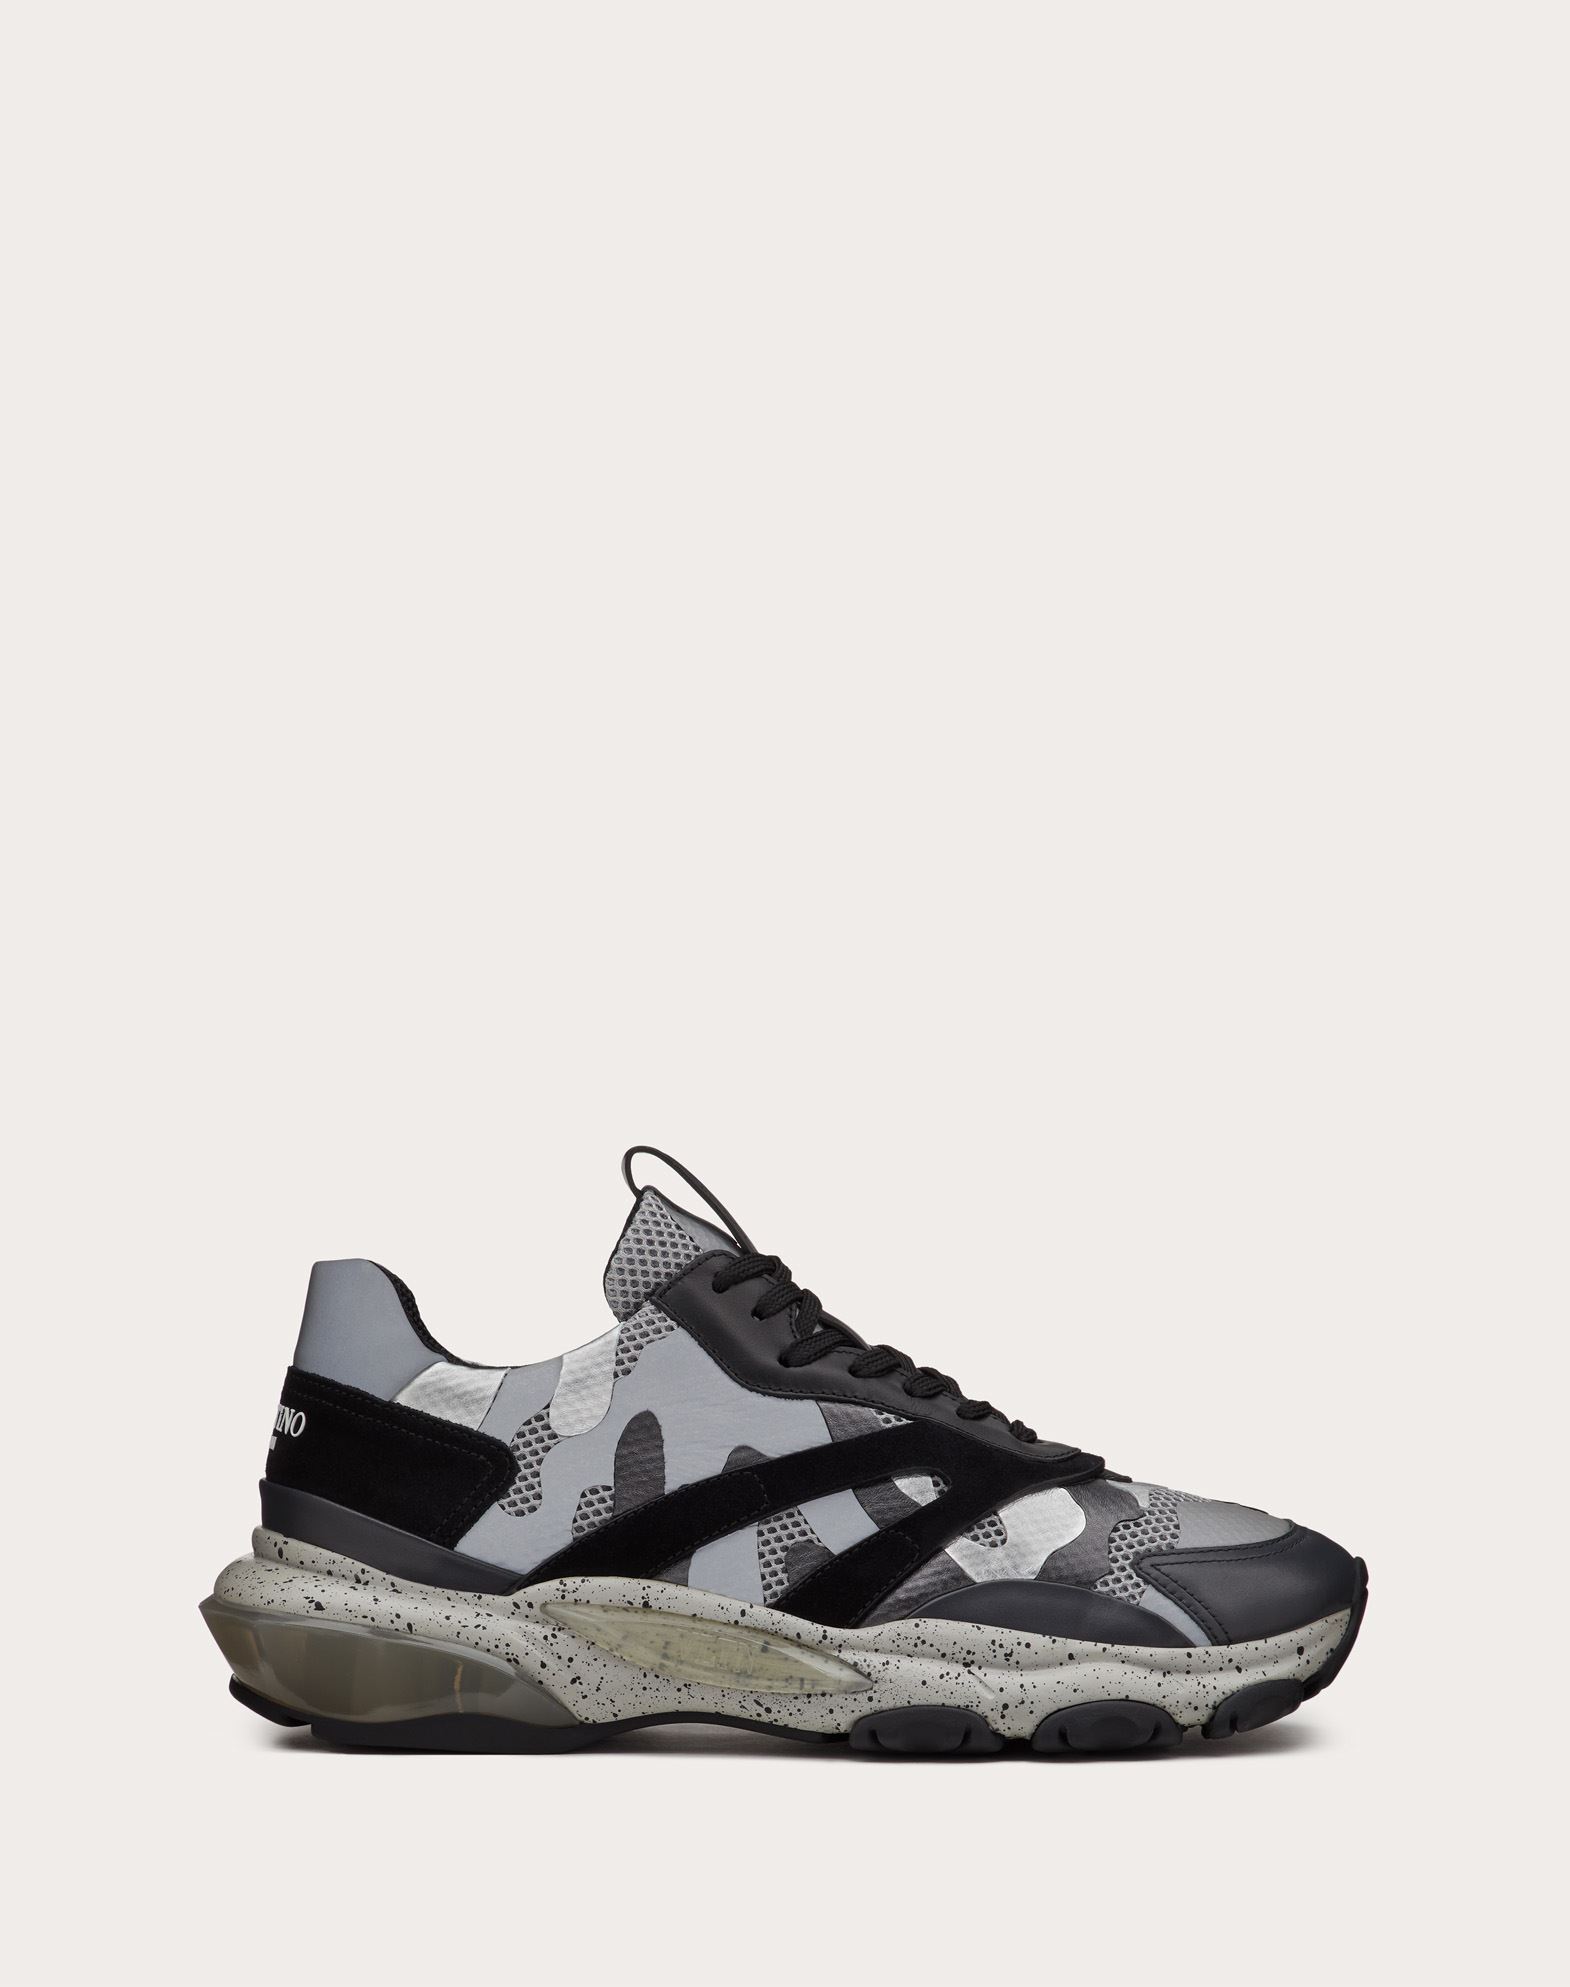 BOUNCE CAMOUFLAGE METALLIC SNEAKER for 